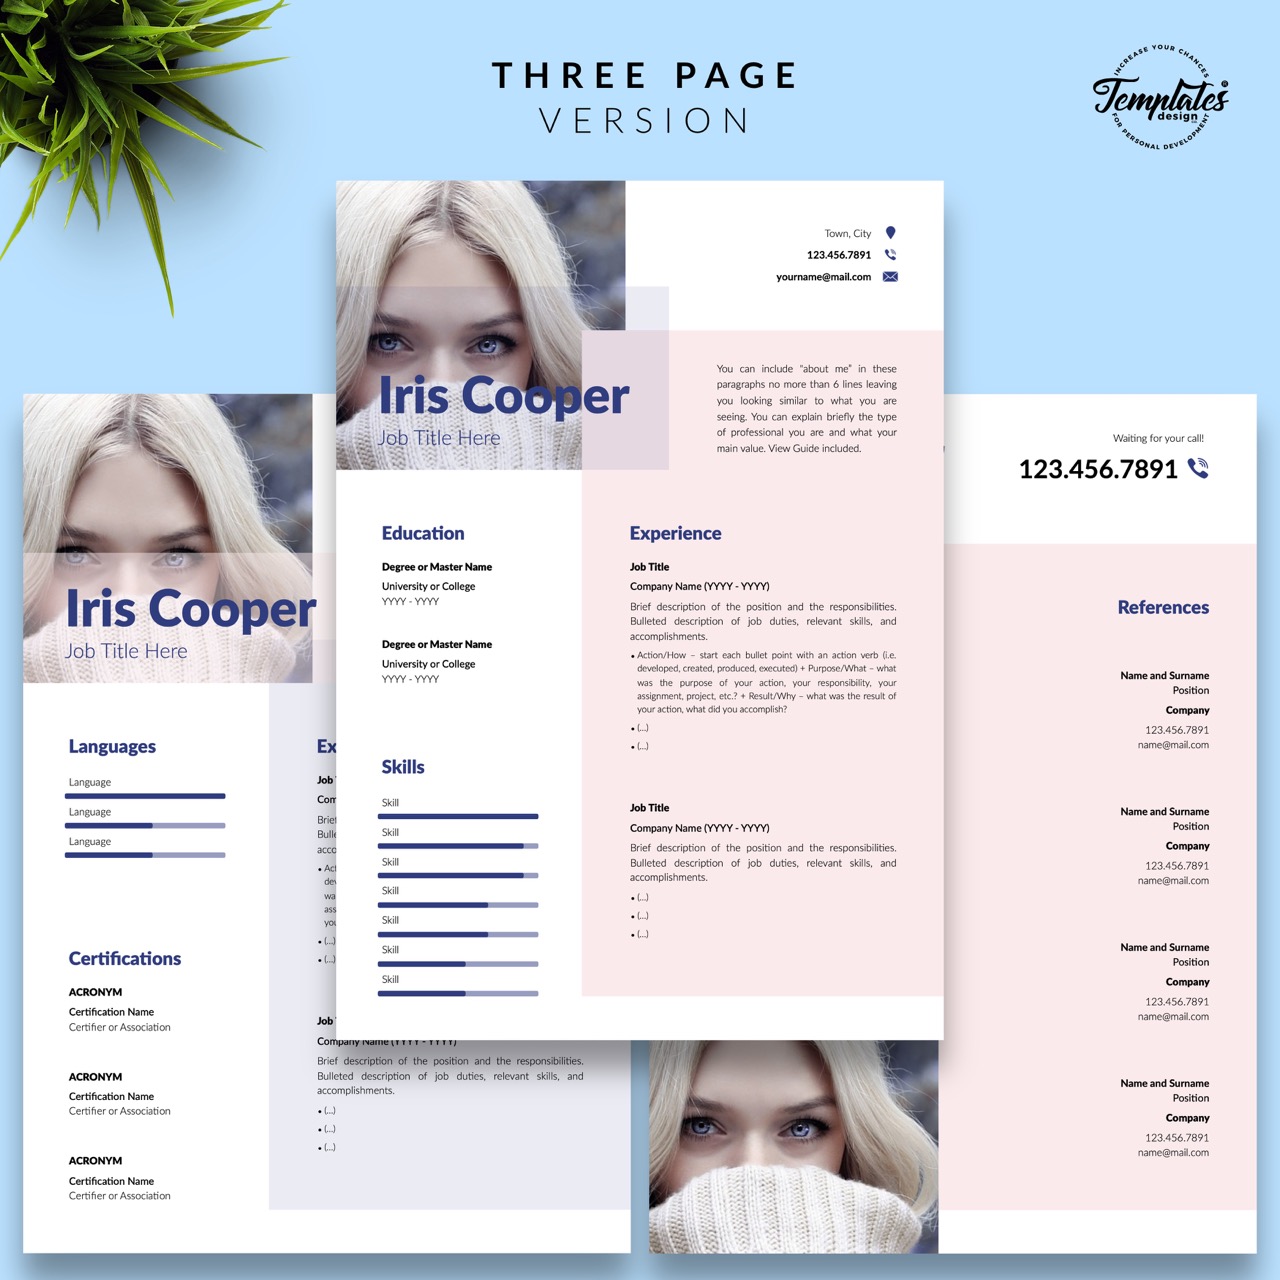 Three pages of a resume with a woman's face.